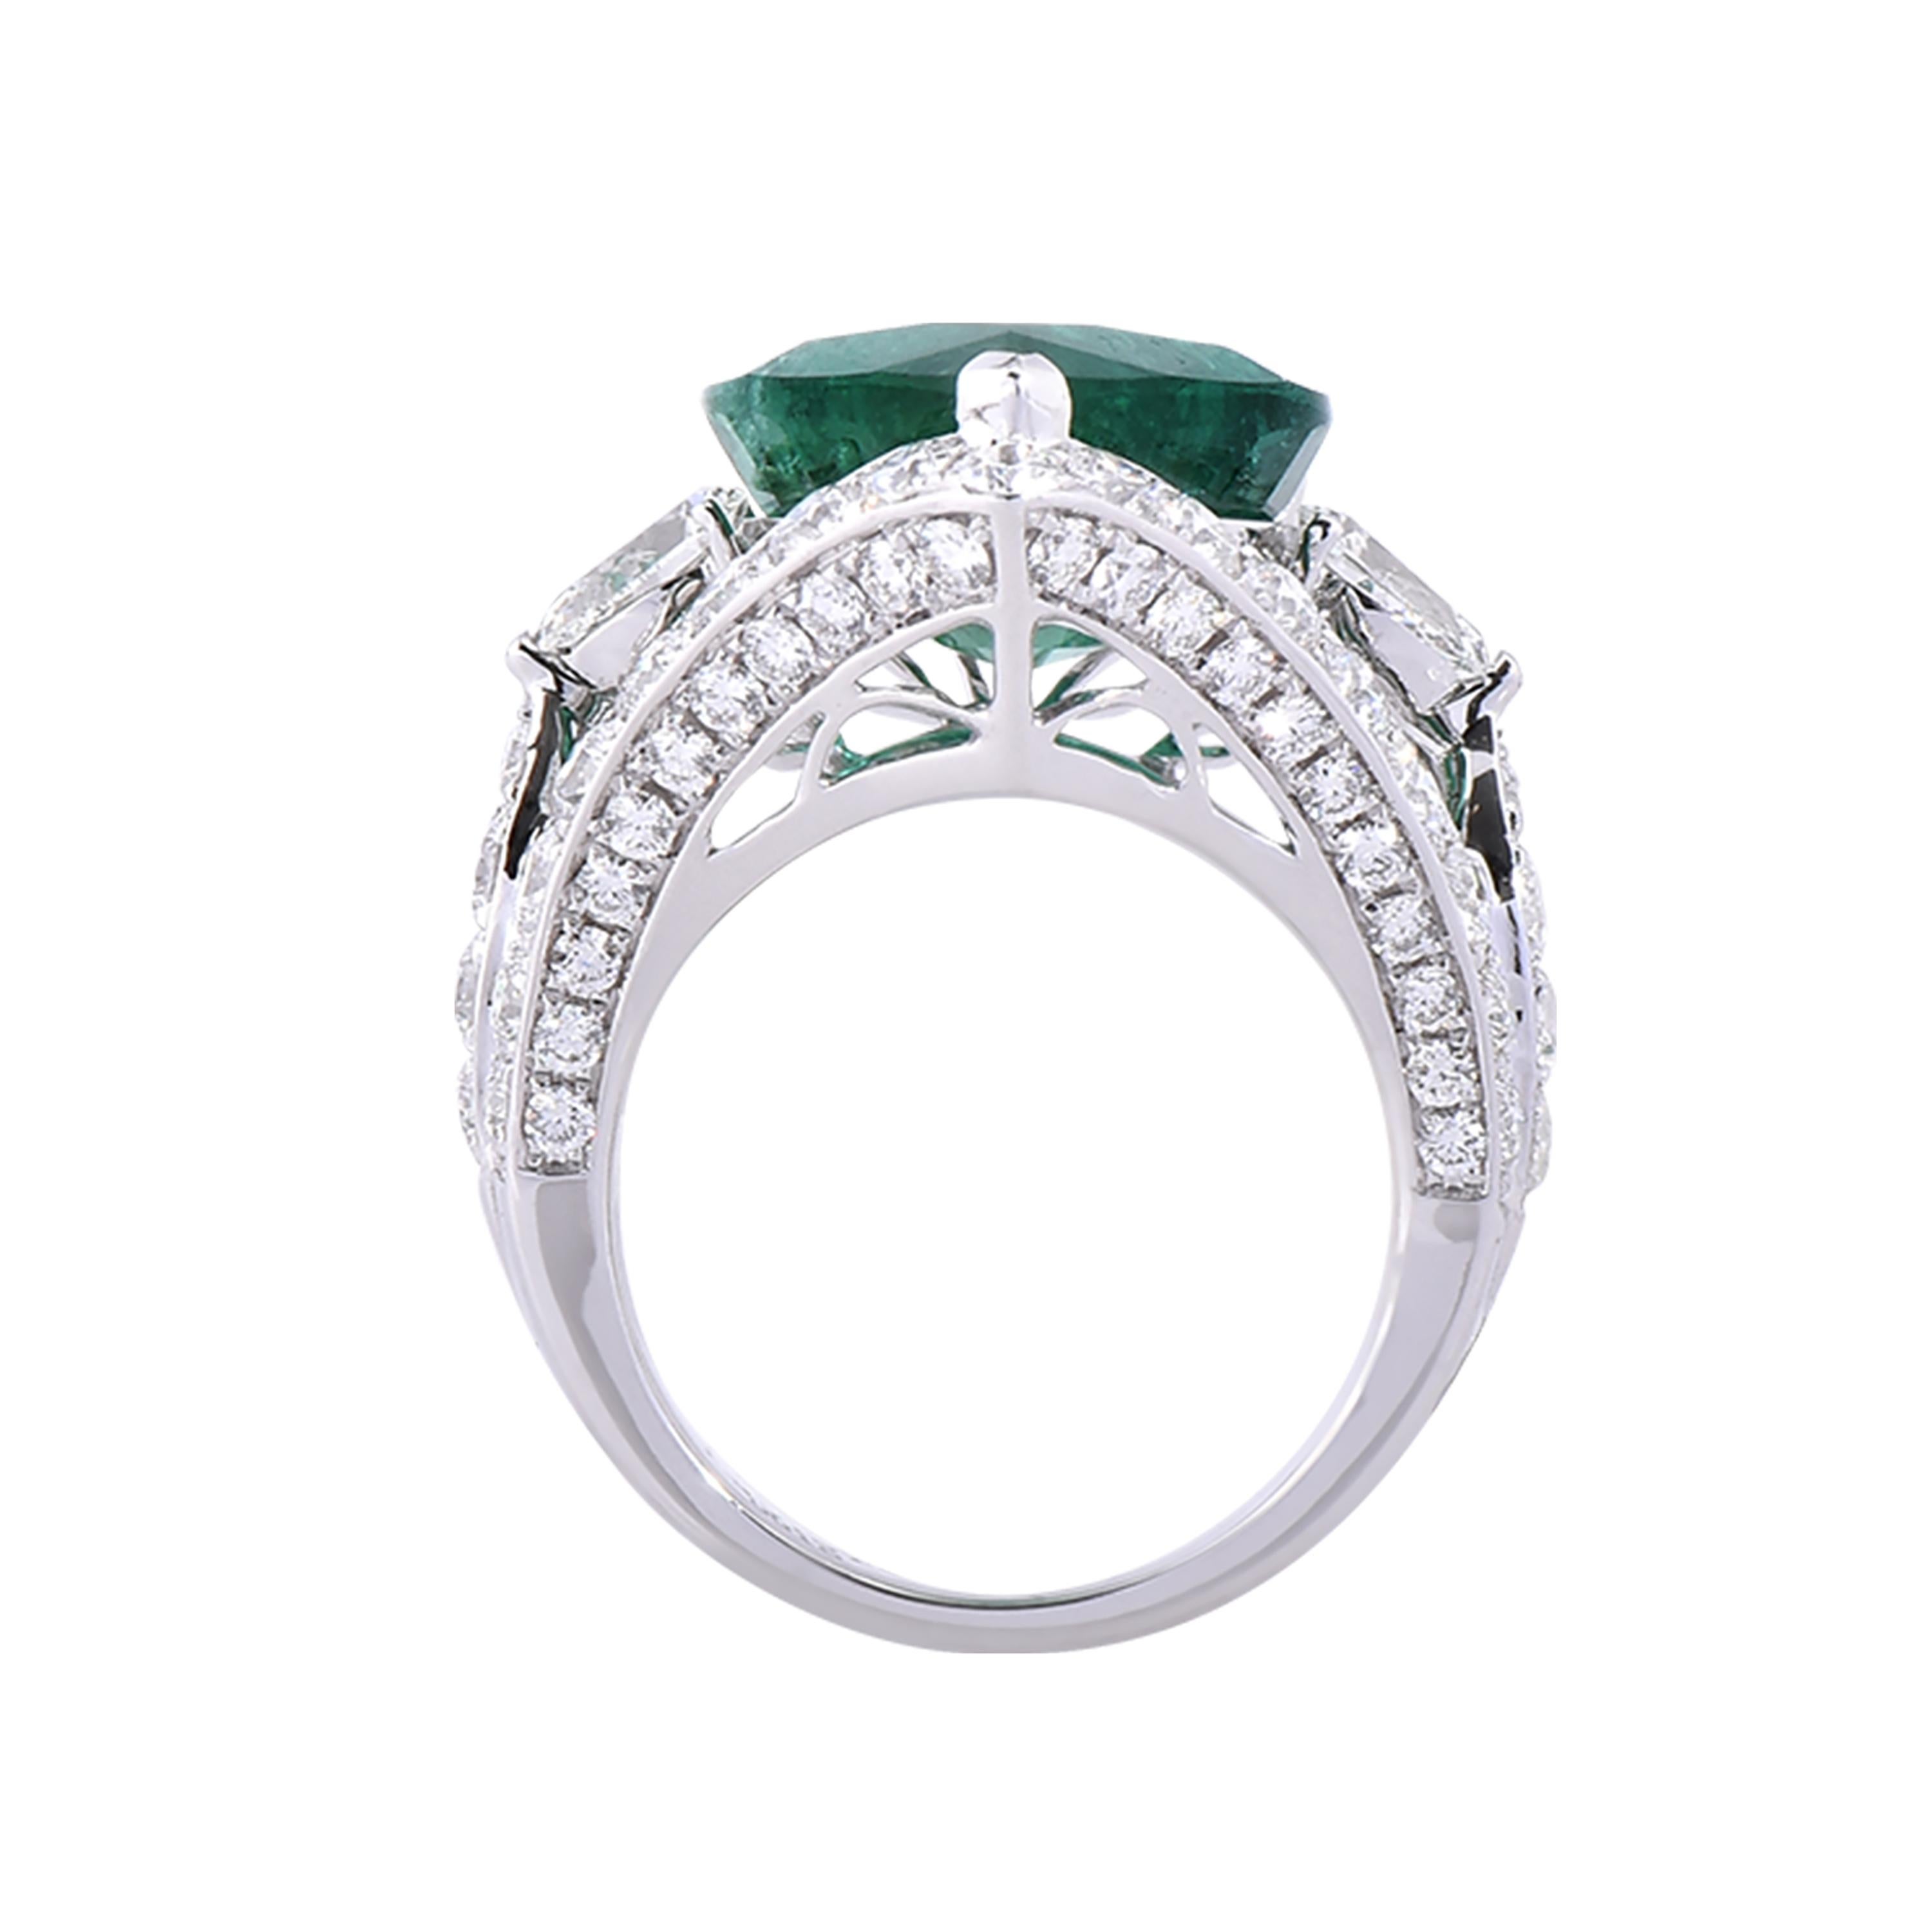 18 karat white gold emerald cocktail ring from the Viridian collection of Laviere. The ring is set with a GIA certified 11.96 carats Zambian pear shape emerald, 3.19 carats round brilliant diamonds and 0.65 carats pear shape brilliant-cut